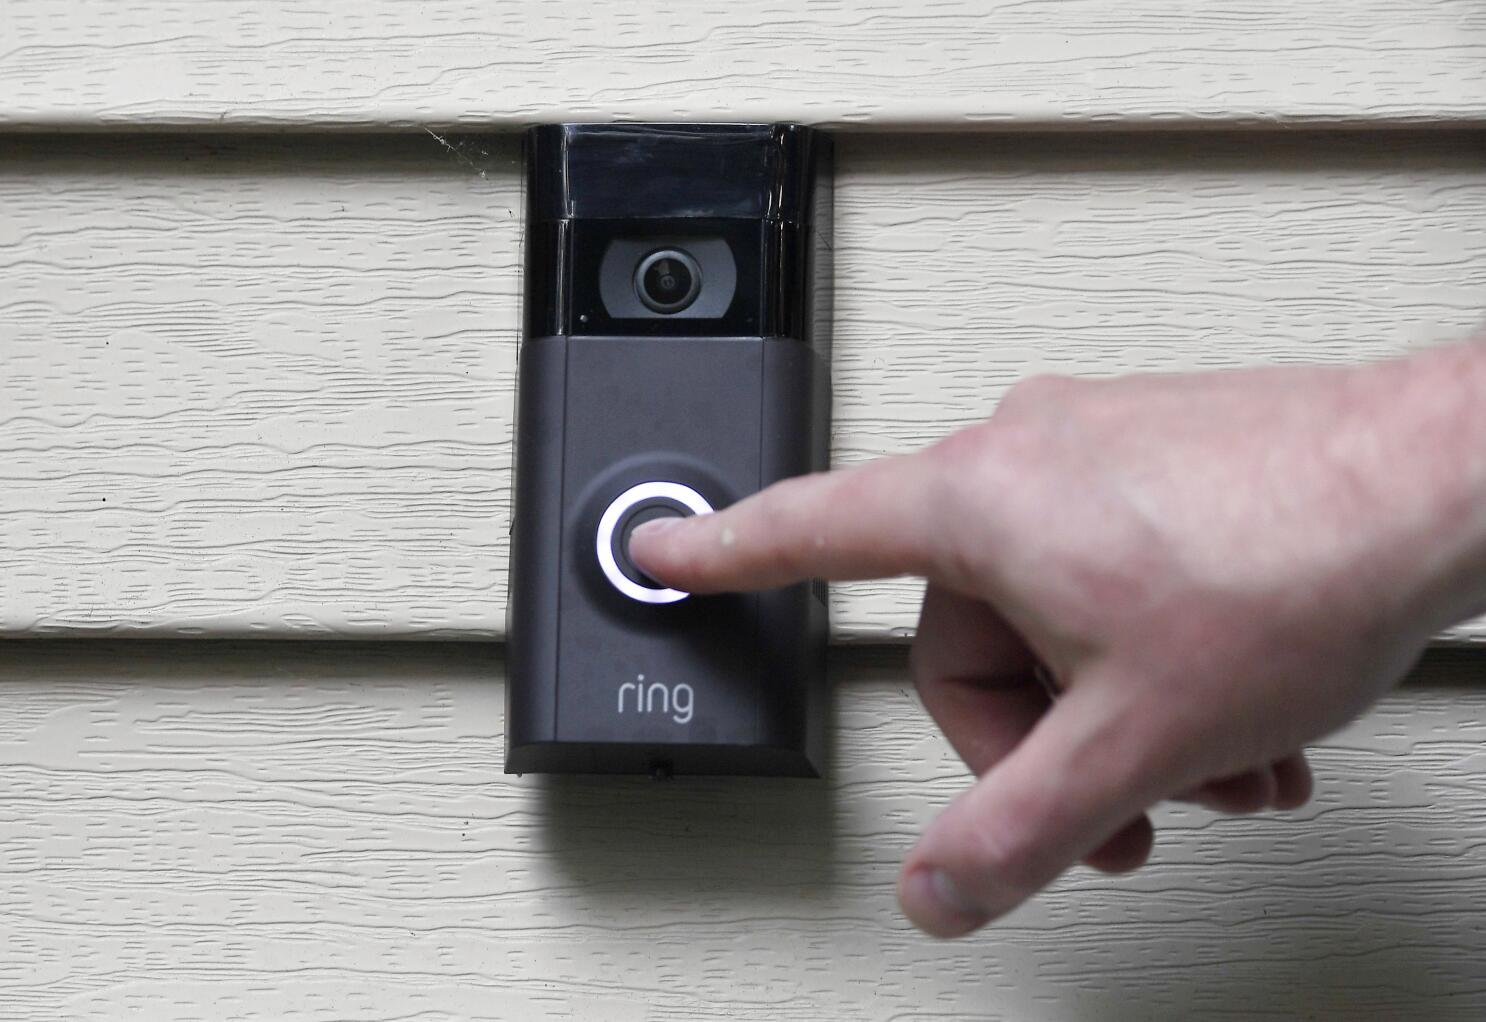 Ring camera footage can be obtained by police. Here's how – NBC4